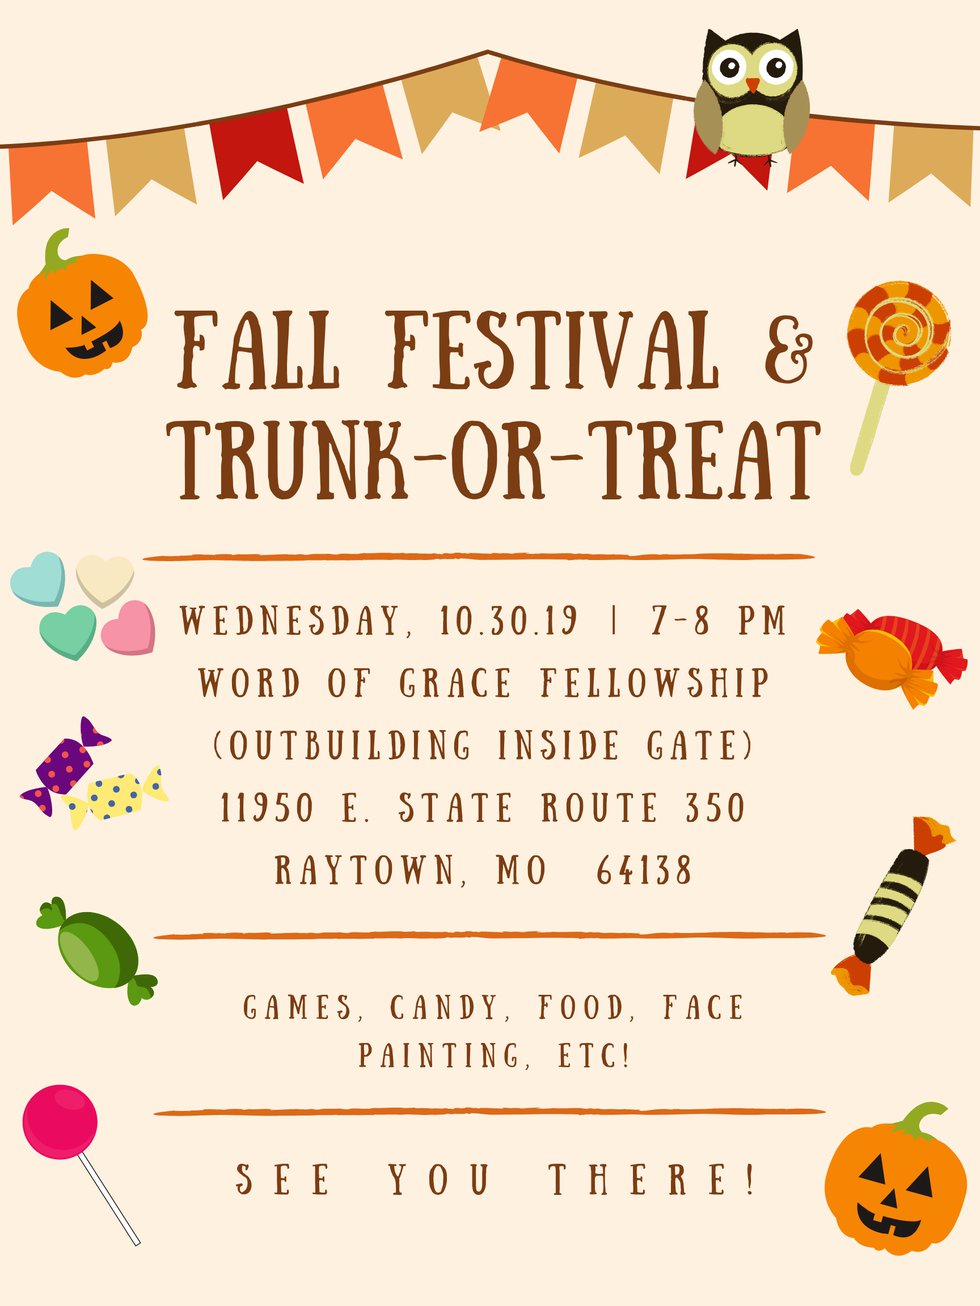 Fall Festival & Trunk-or-treat 2019.png